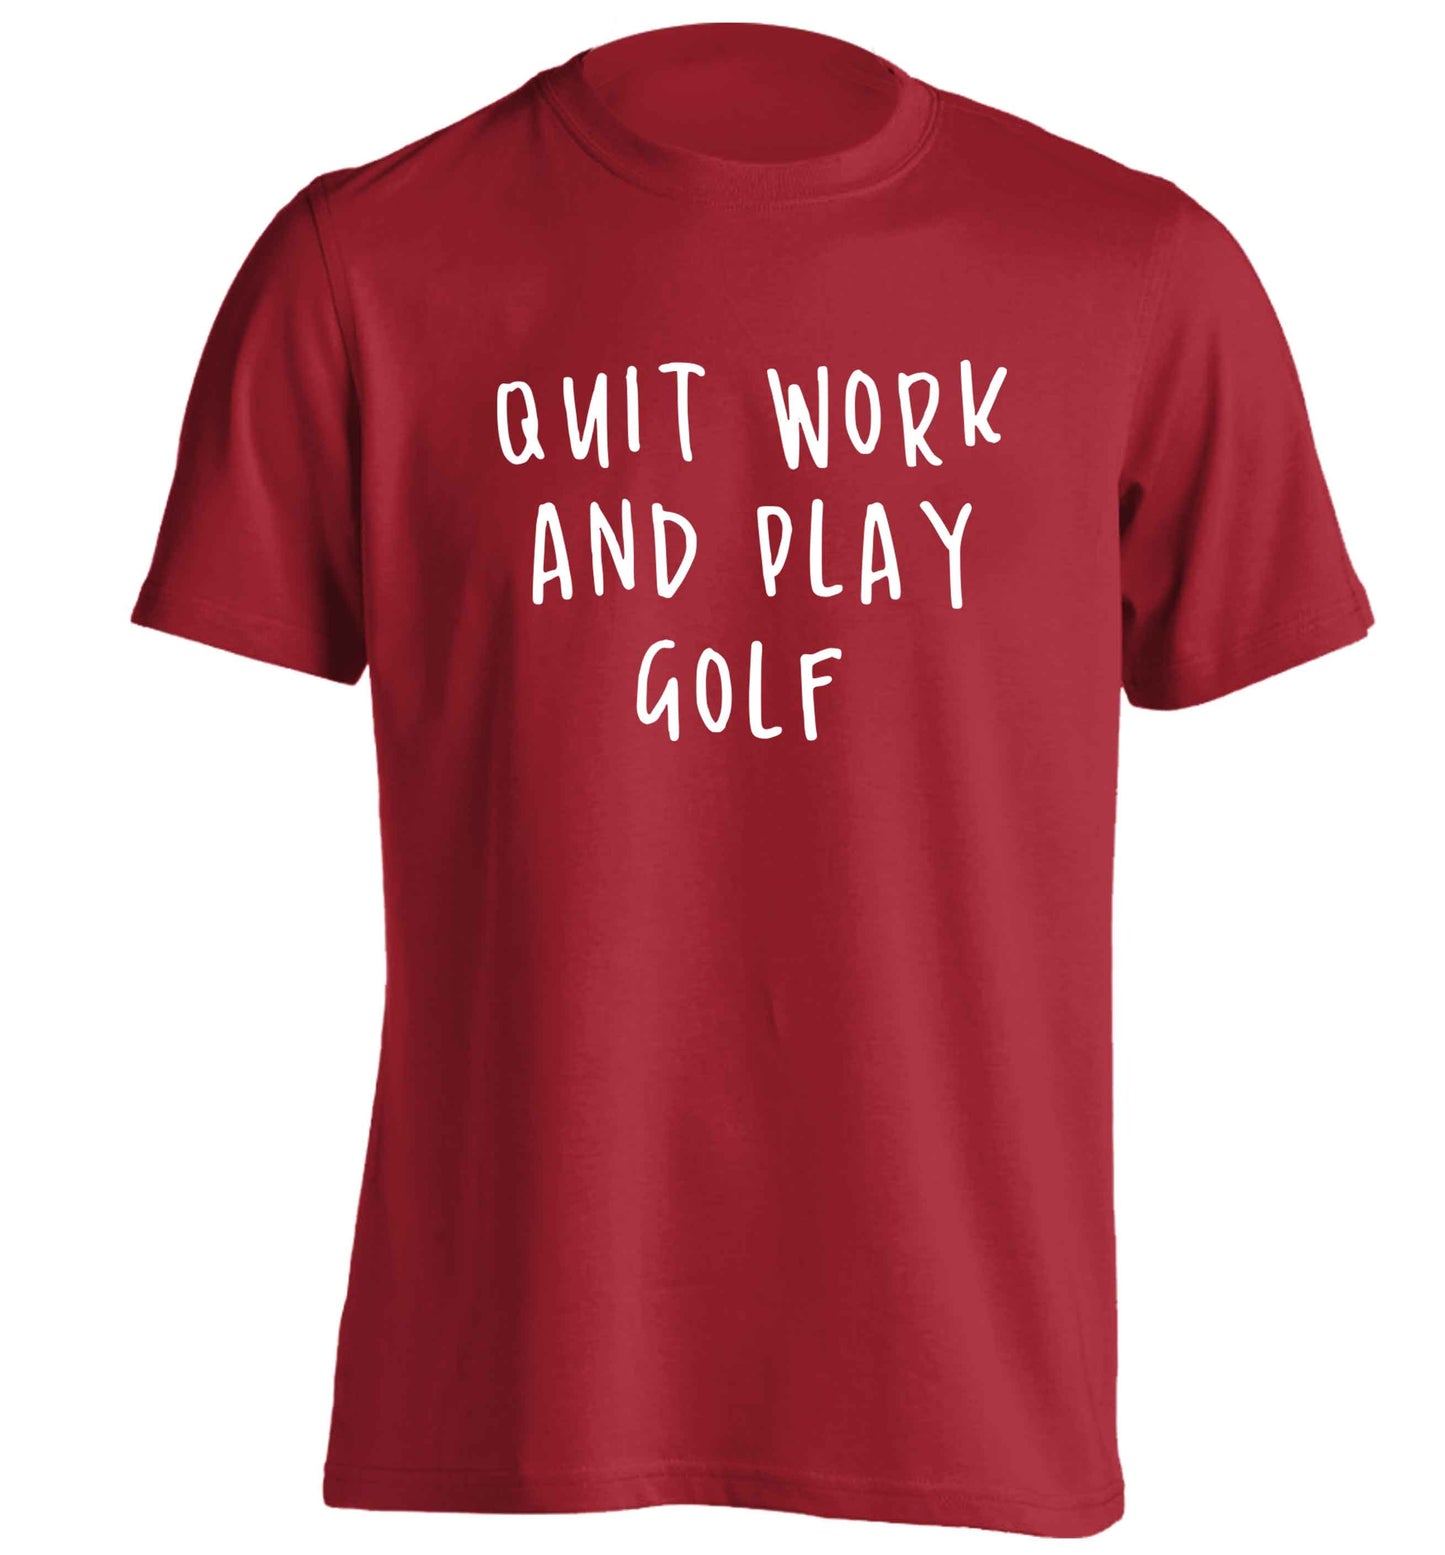 Quit work and play golf adults unisex red Tshirt 2XL